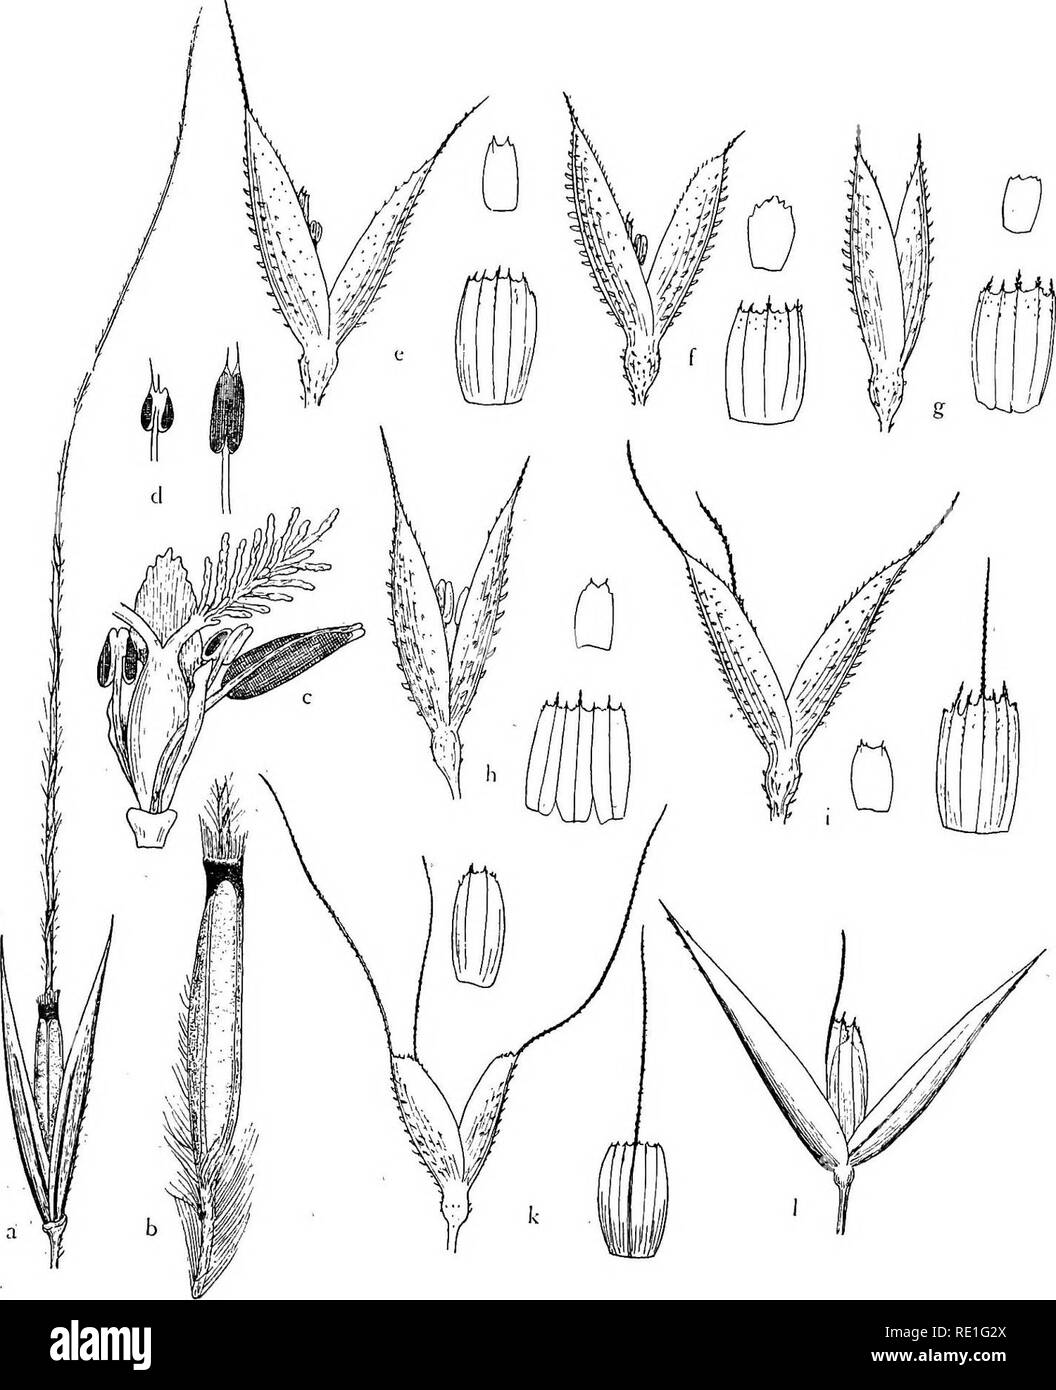 . The phanerogams of the Juan Fernandez Islands. Botany. THE PHANEROGAMS OF THE JOAN FERNANDEZ ISLANDS 99. Fig. i. a—d Stij&gt;a fernandezicuia: a spikelet, X 21; b flowering glume, X 5,&quot; c flower with palea and two lodicules, X 2o; d anthers, X 10. e—i Polypogon imberbis, spikelets, flowering glume and palea: e leg. Reed, f Skottsberg no. 298, g no. 491, h no. 471, i f. aristata no. 1109. k P, crinitus, spikelet, flowering glume and palea. 1 Agrostis masafuerana, spikelet. — e—1 X 10. Podophorus Phil. 4. P. bromoides Phil. — JoiiOW, Estud. 135. Masatierra: GerMain! Discovered by GERMAIN  Stock Photo